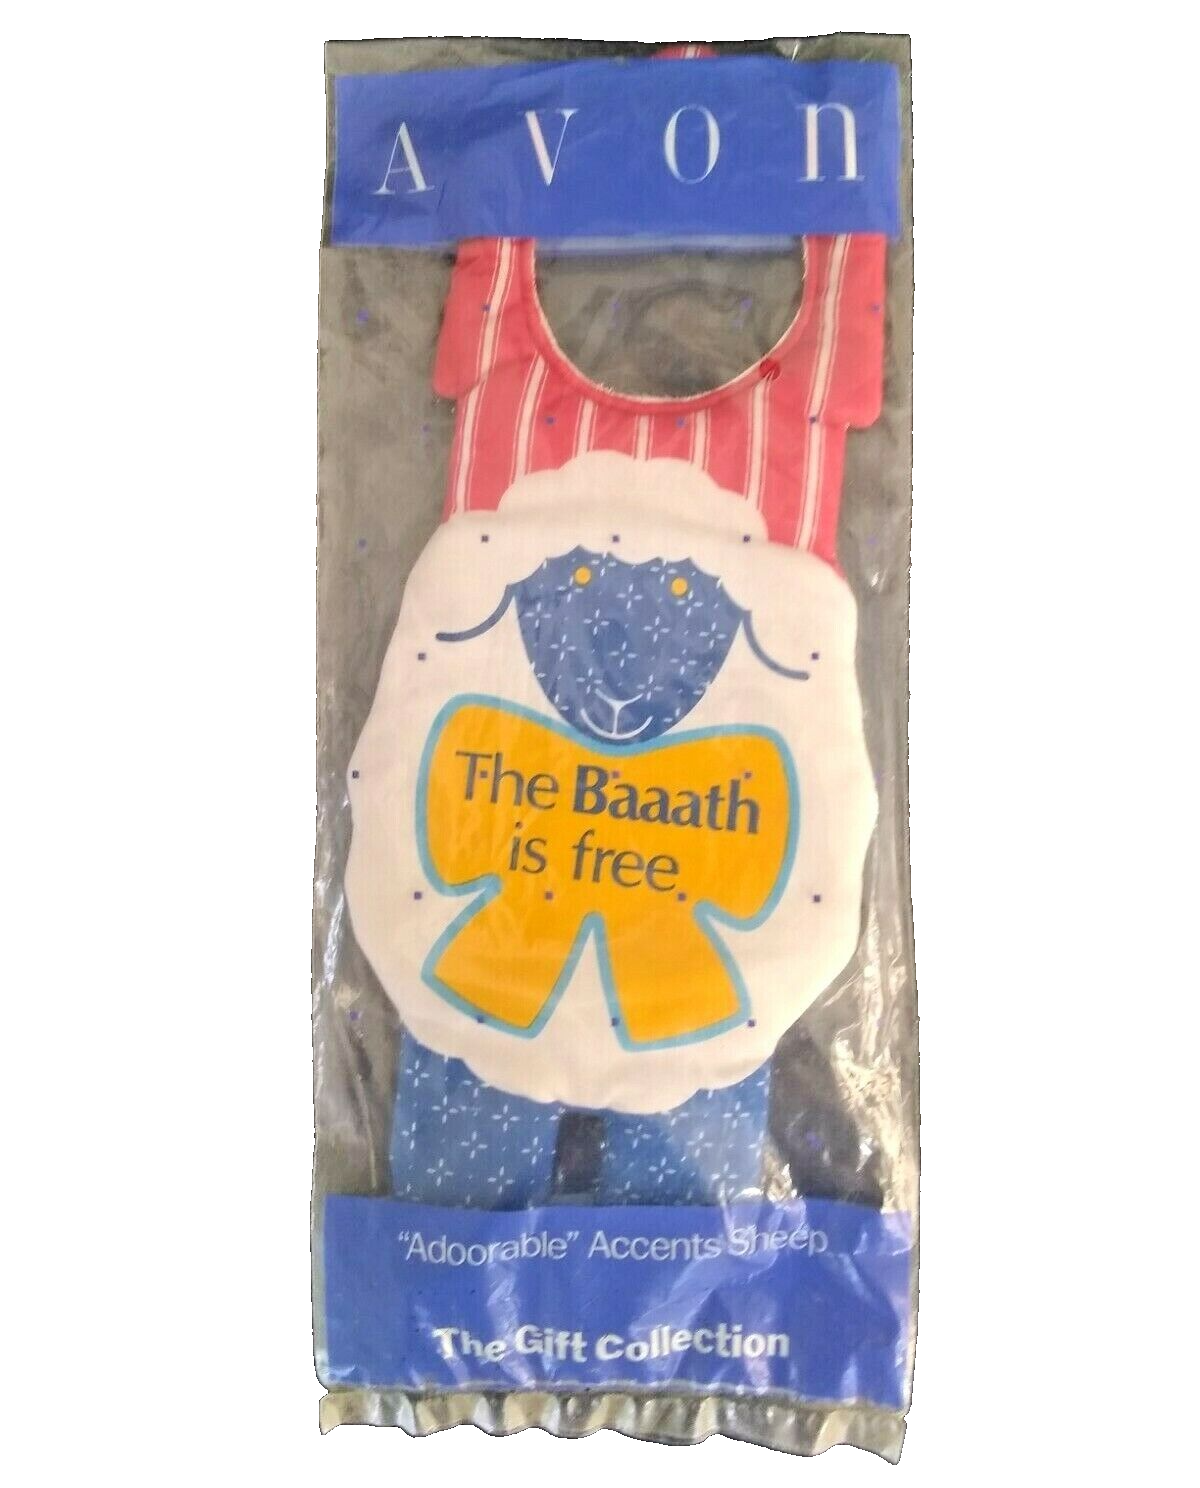 Avon Door Accents Sign The Baaath is Busy or Free Sheep 1989 Vintage - $8.81